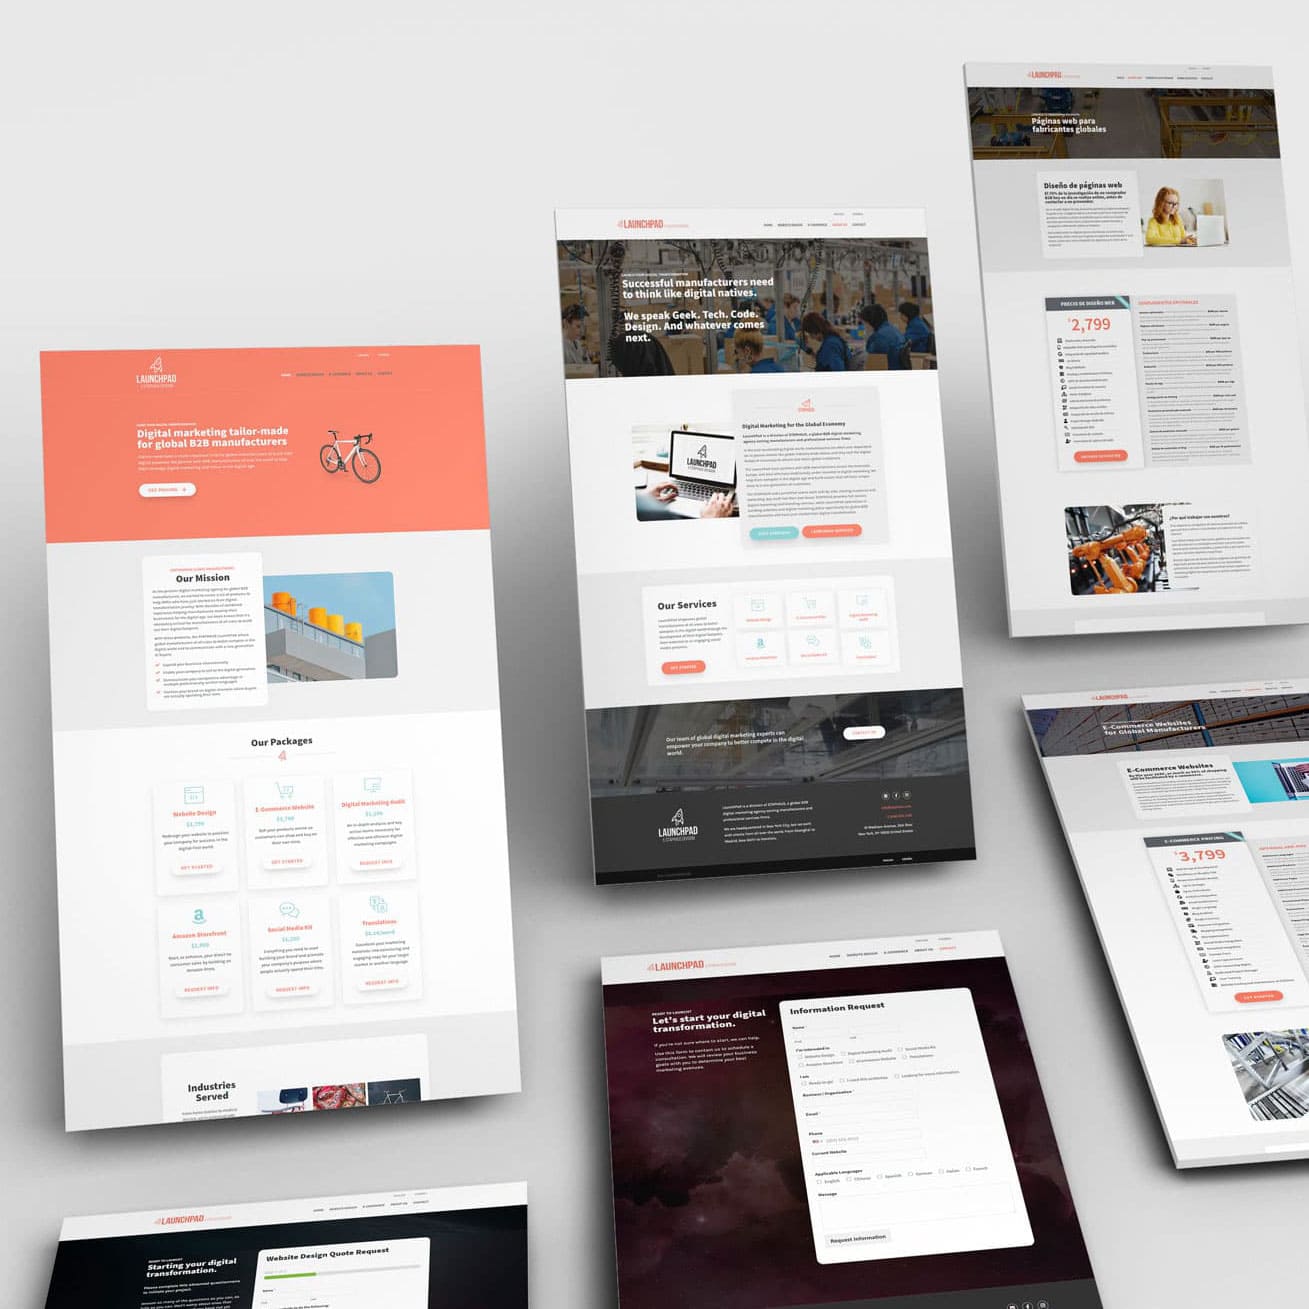 Website design layouts for Launchpad Digital Marketers